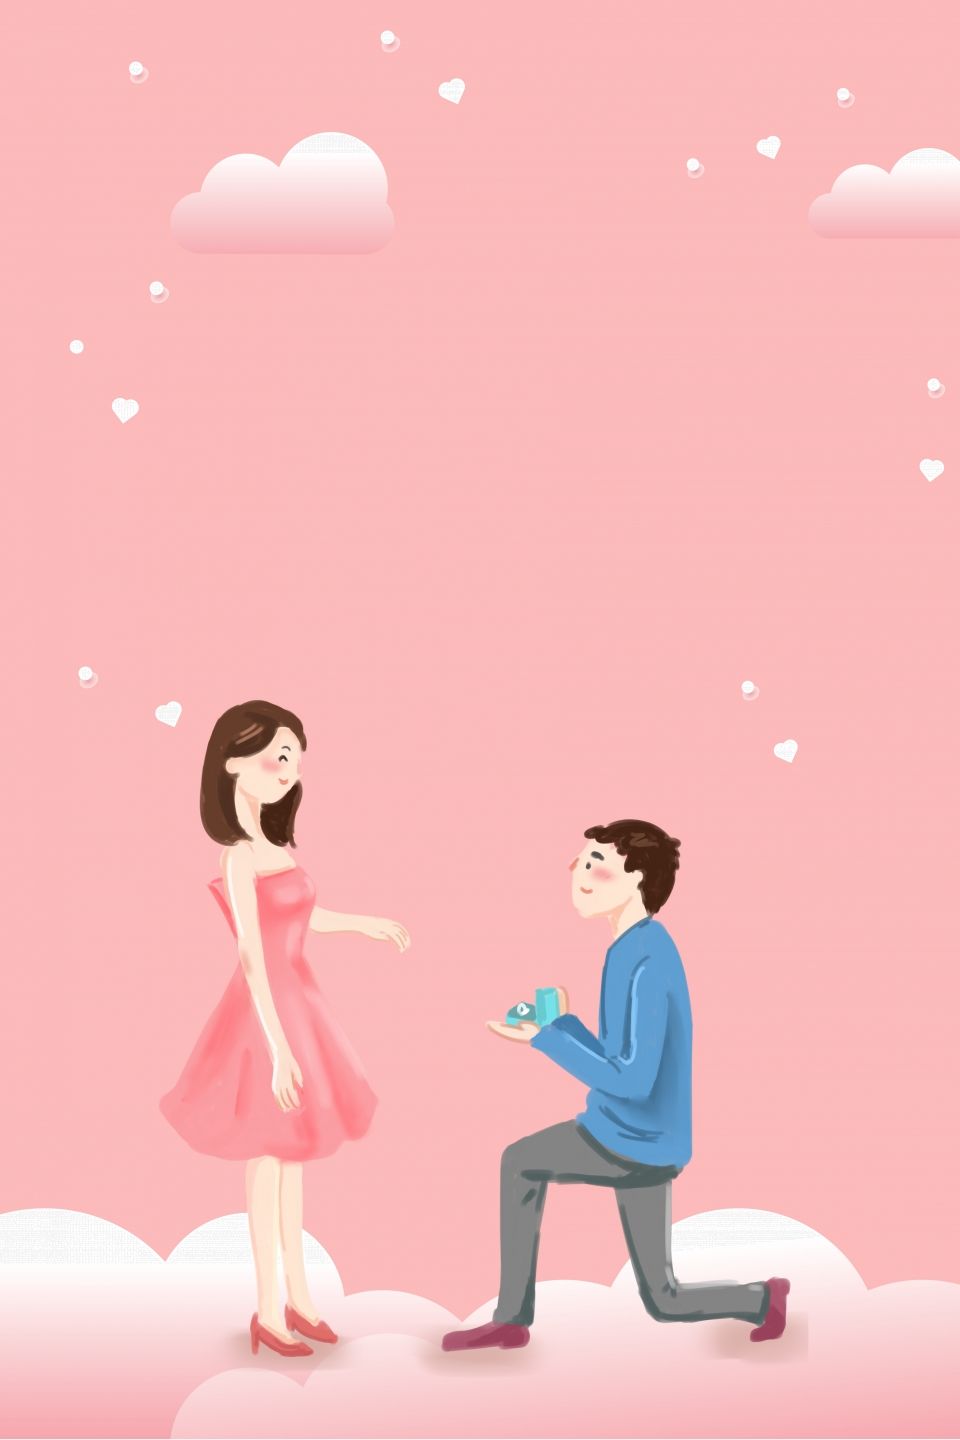 Cartoon Minimalistic Pink Valentine Confession H5 Background, Marriage Proposal, Cartoon Couple, Cartoon Background Image for Free Download